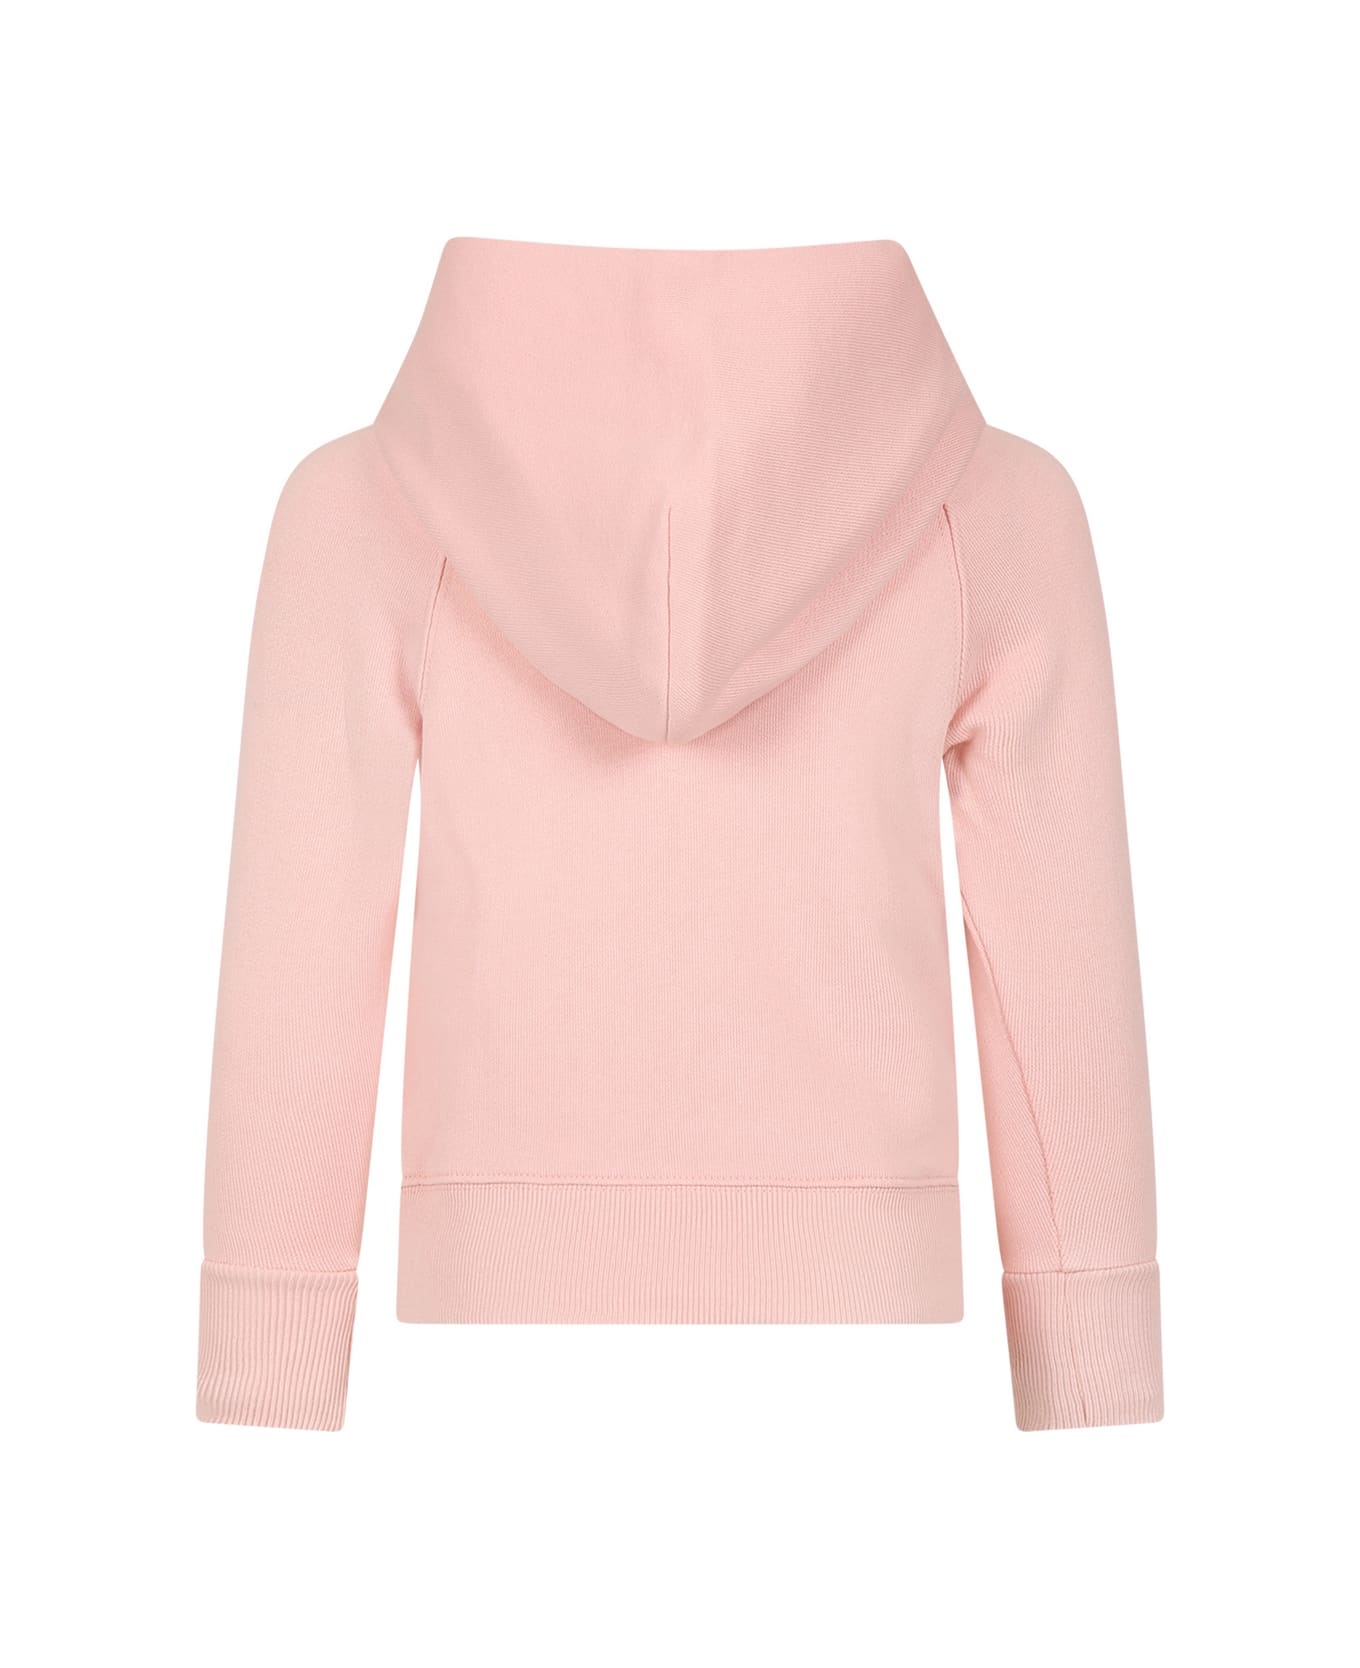 Gucci Pink Sweatshirt For Girl With Double G - Pink